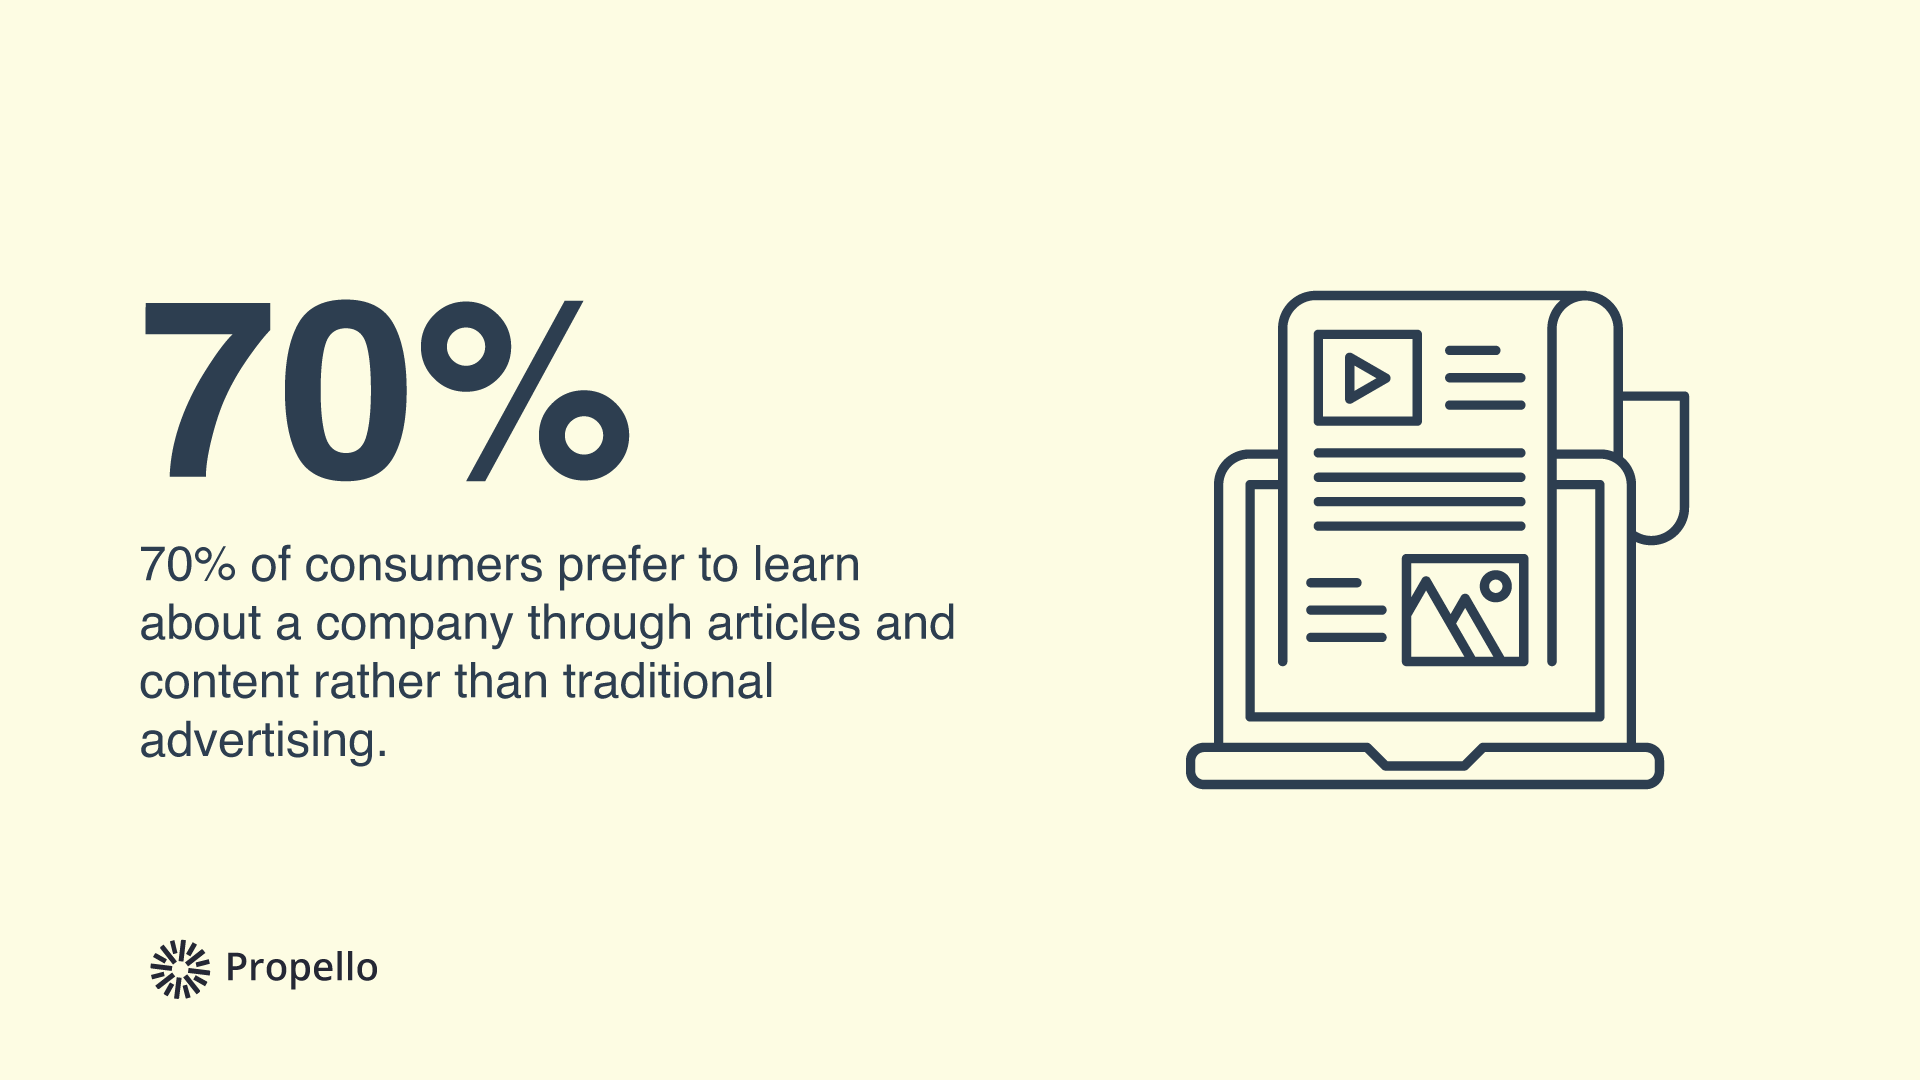 70% of consumers prefer to learn about a company through articles and content rather than traditional advertising.